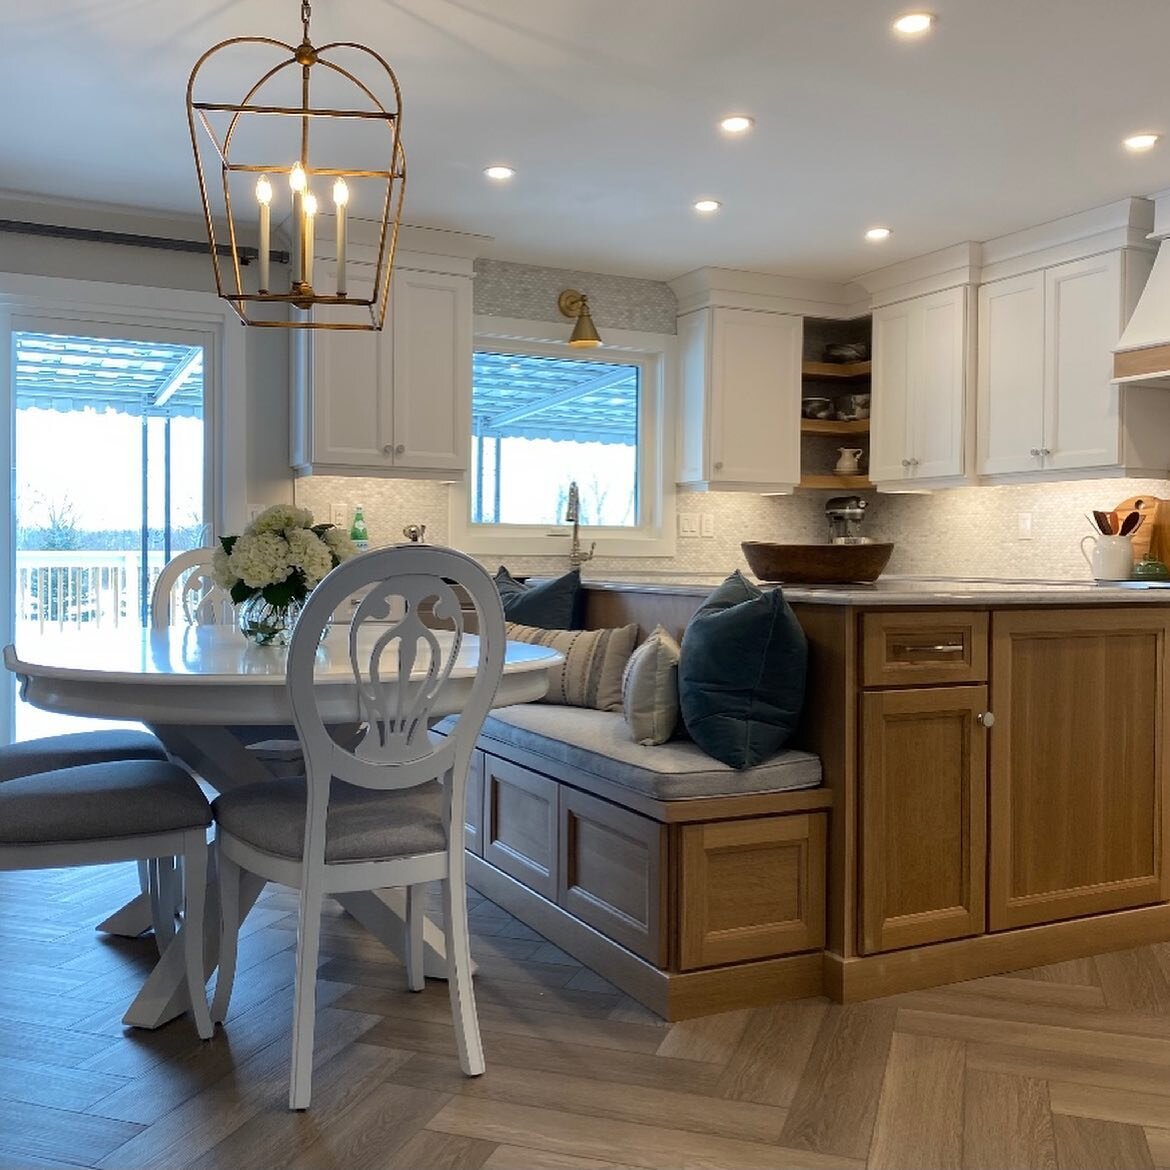 This was such an amazing project for this young family. It&rsquo;s beautiful and functional!!! @wingerscabinets @sixandonestone 
#twelveoaksflooring #Kohler #generationlighting